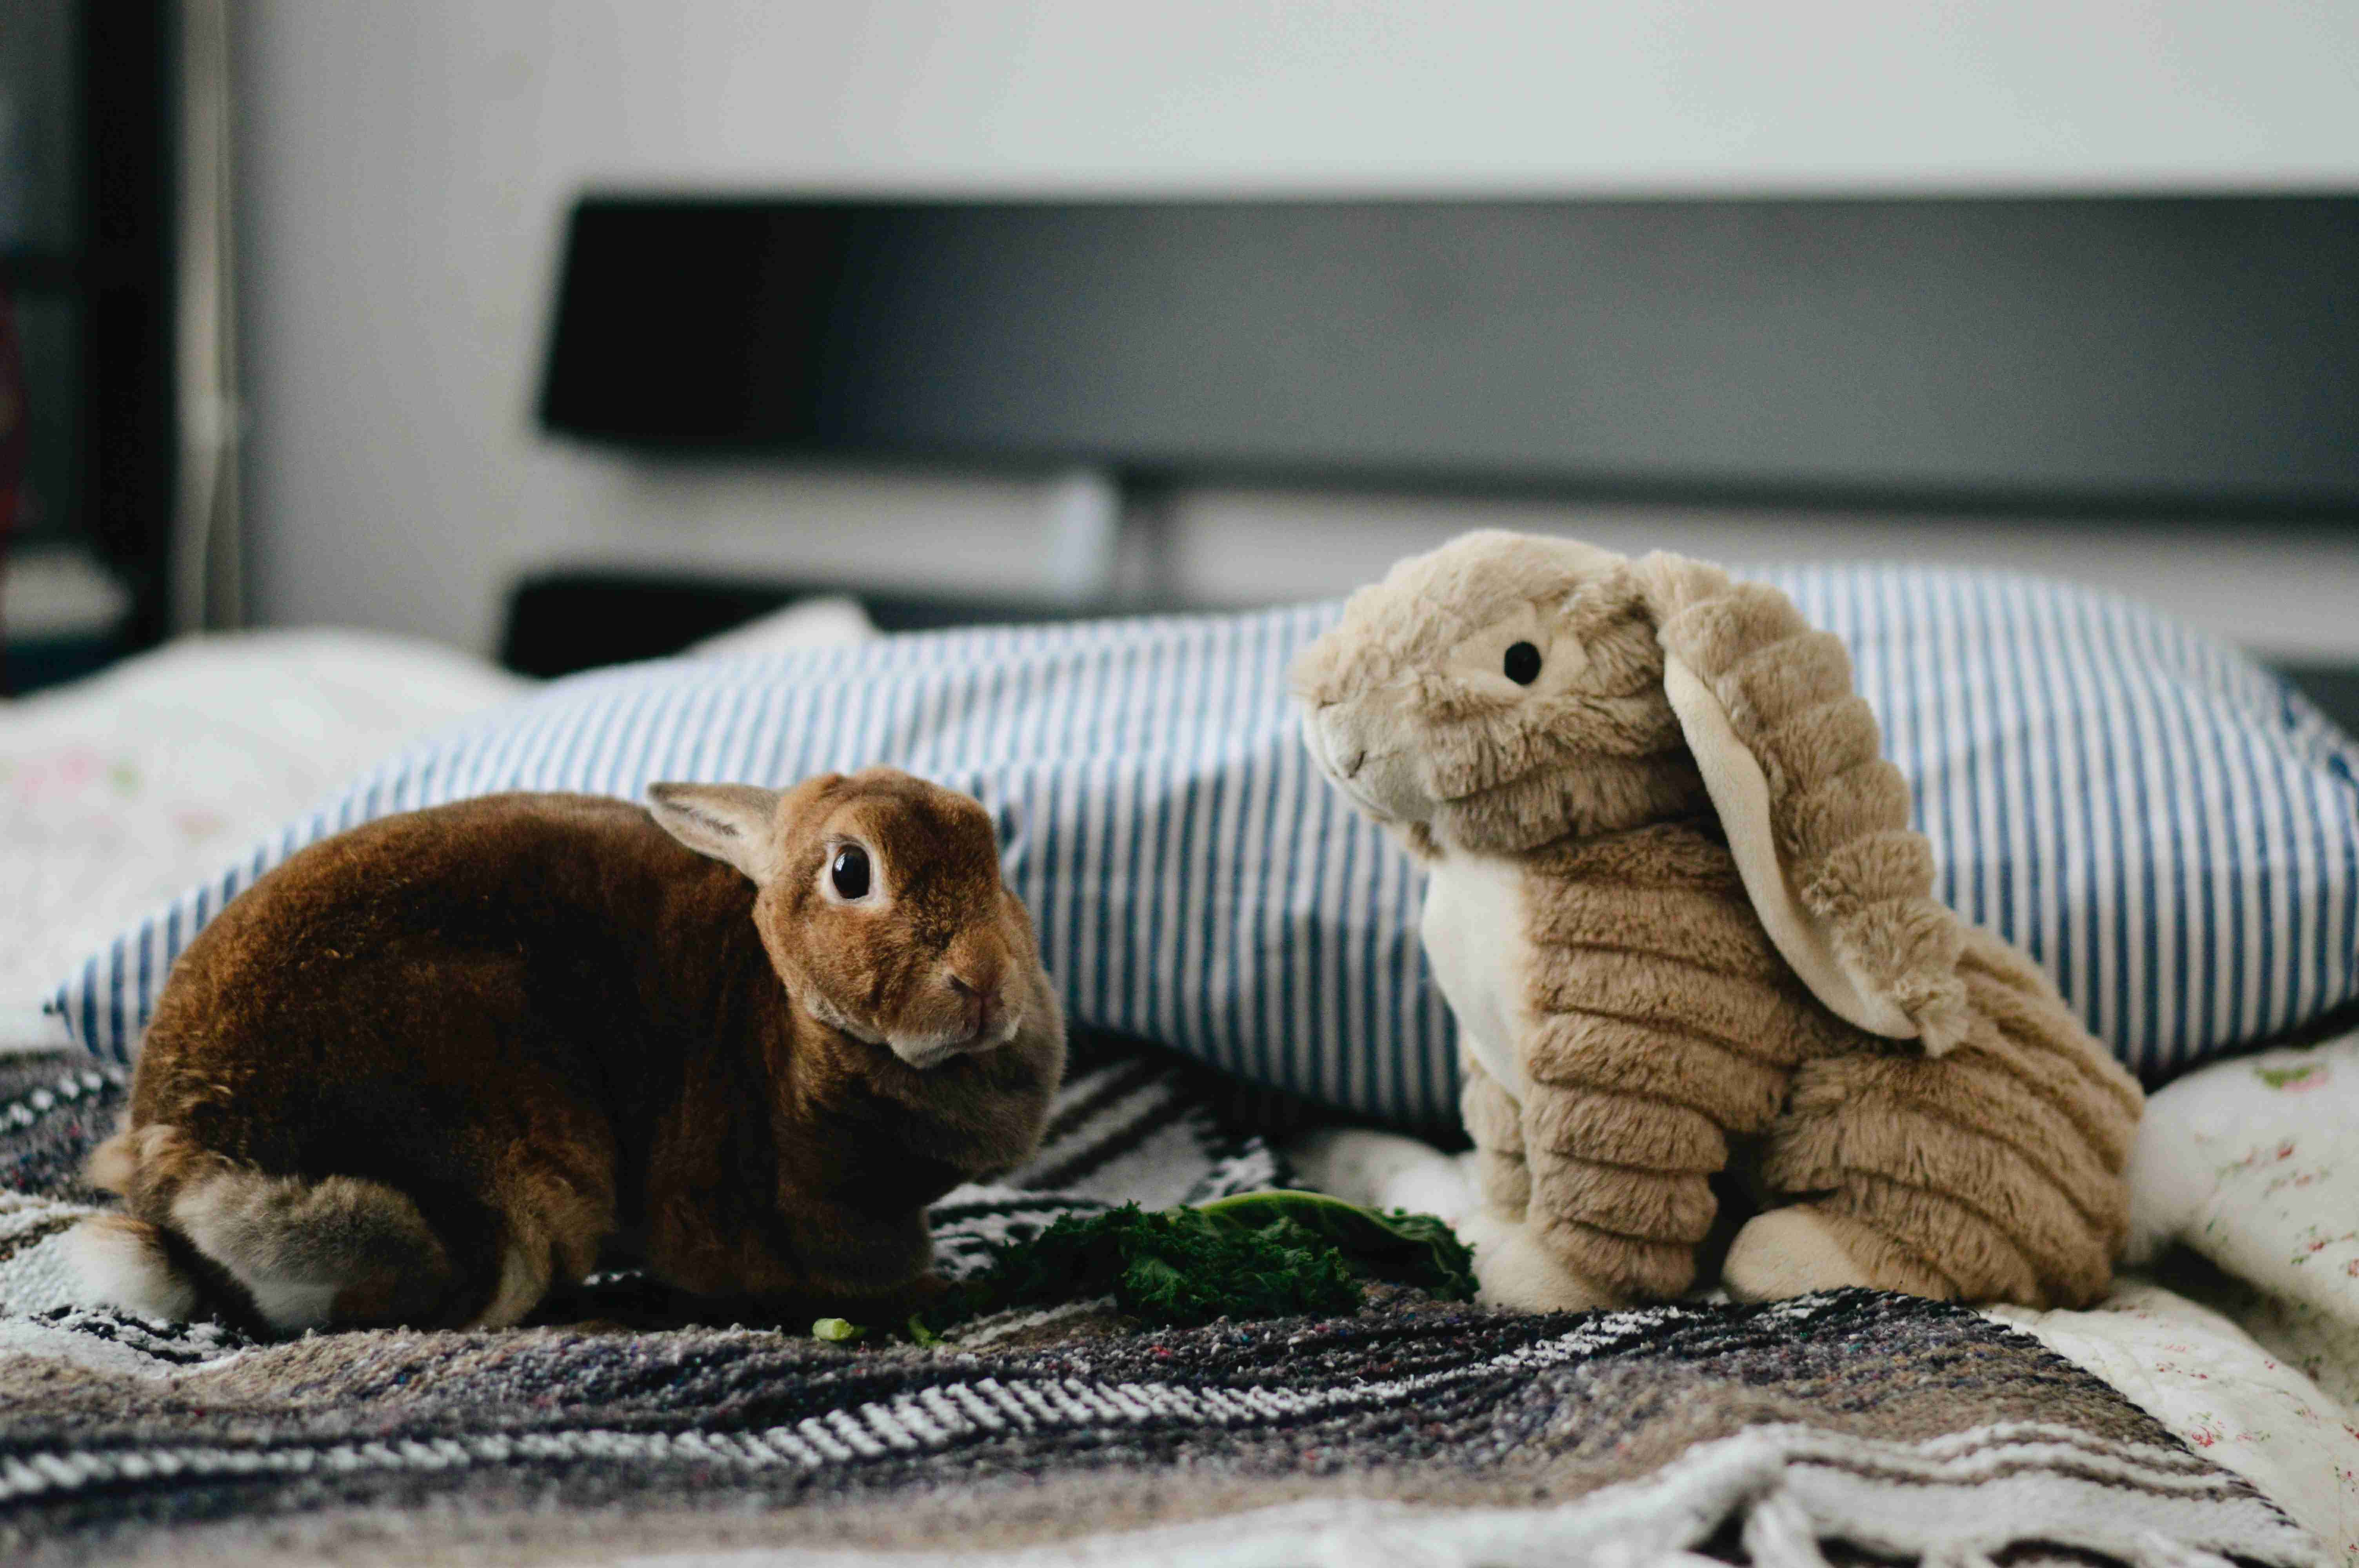 Rabbit Bedding Guide: Choosing the Best Type of Bedding for Your Furry Friend